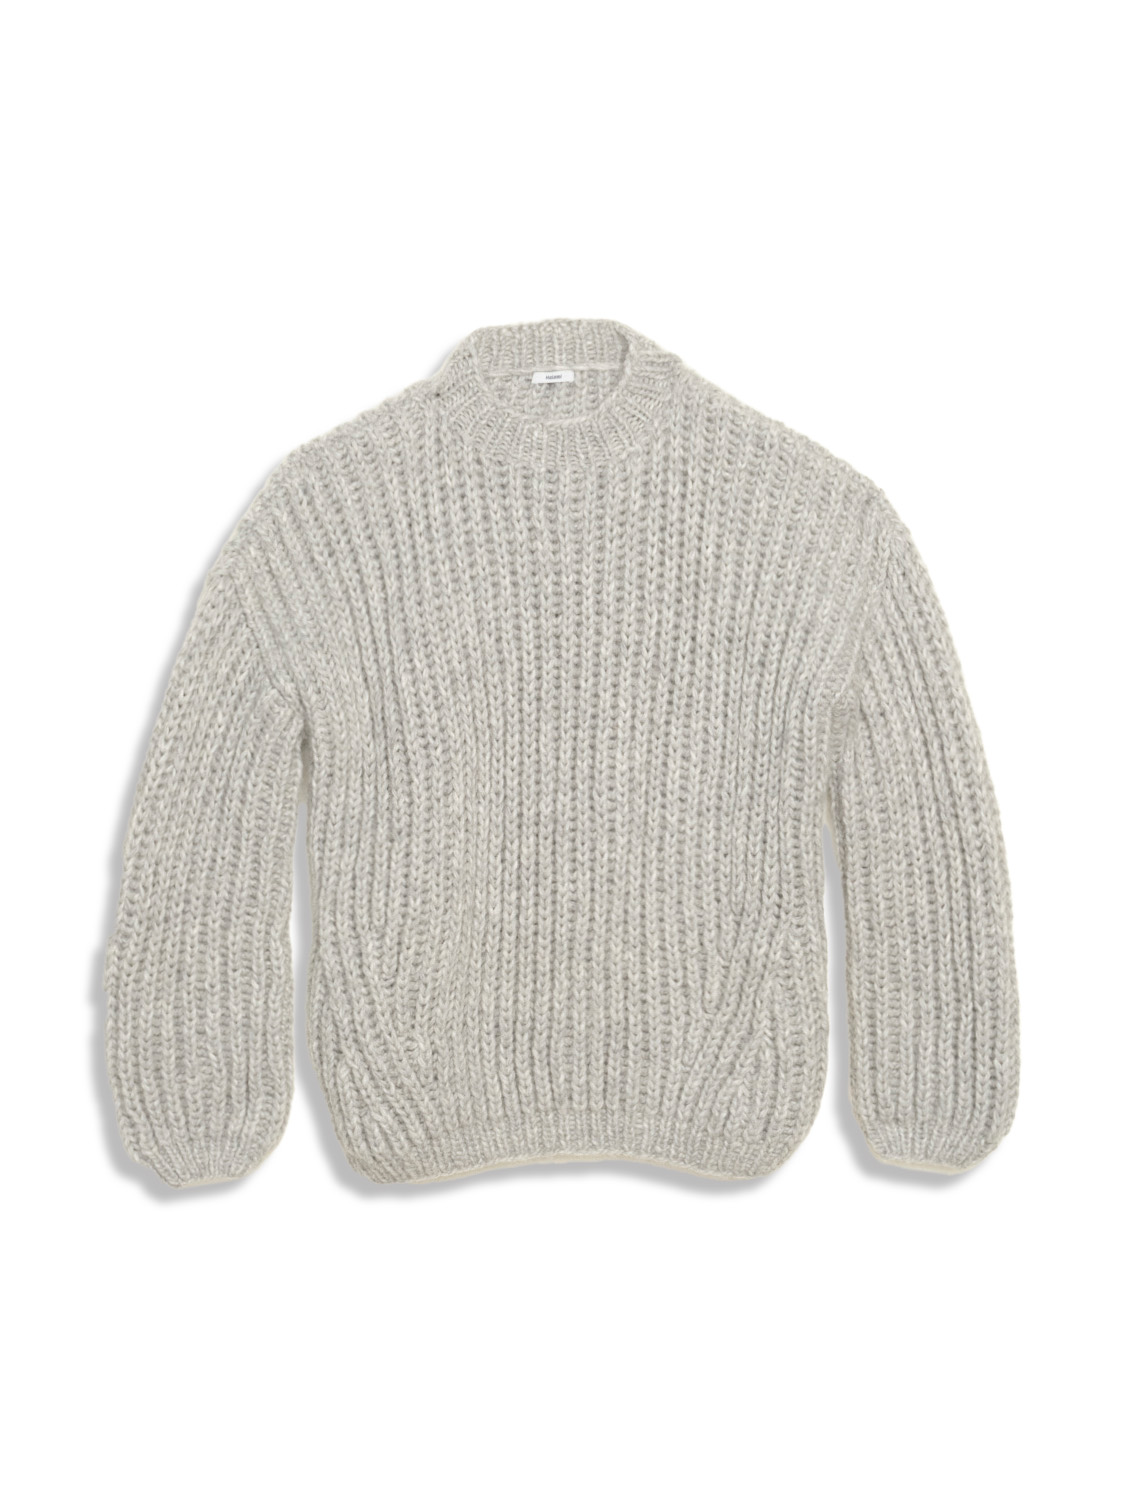 Oversized Alpaca Brioche Sweater - Cashmere knit sweater with stand-up collar